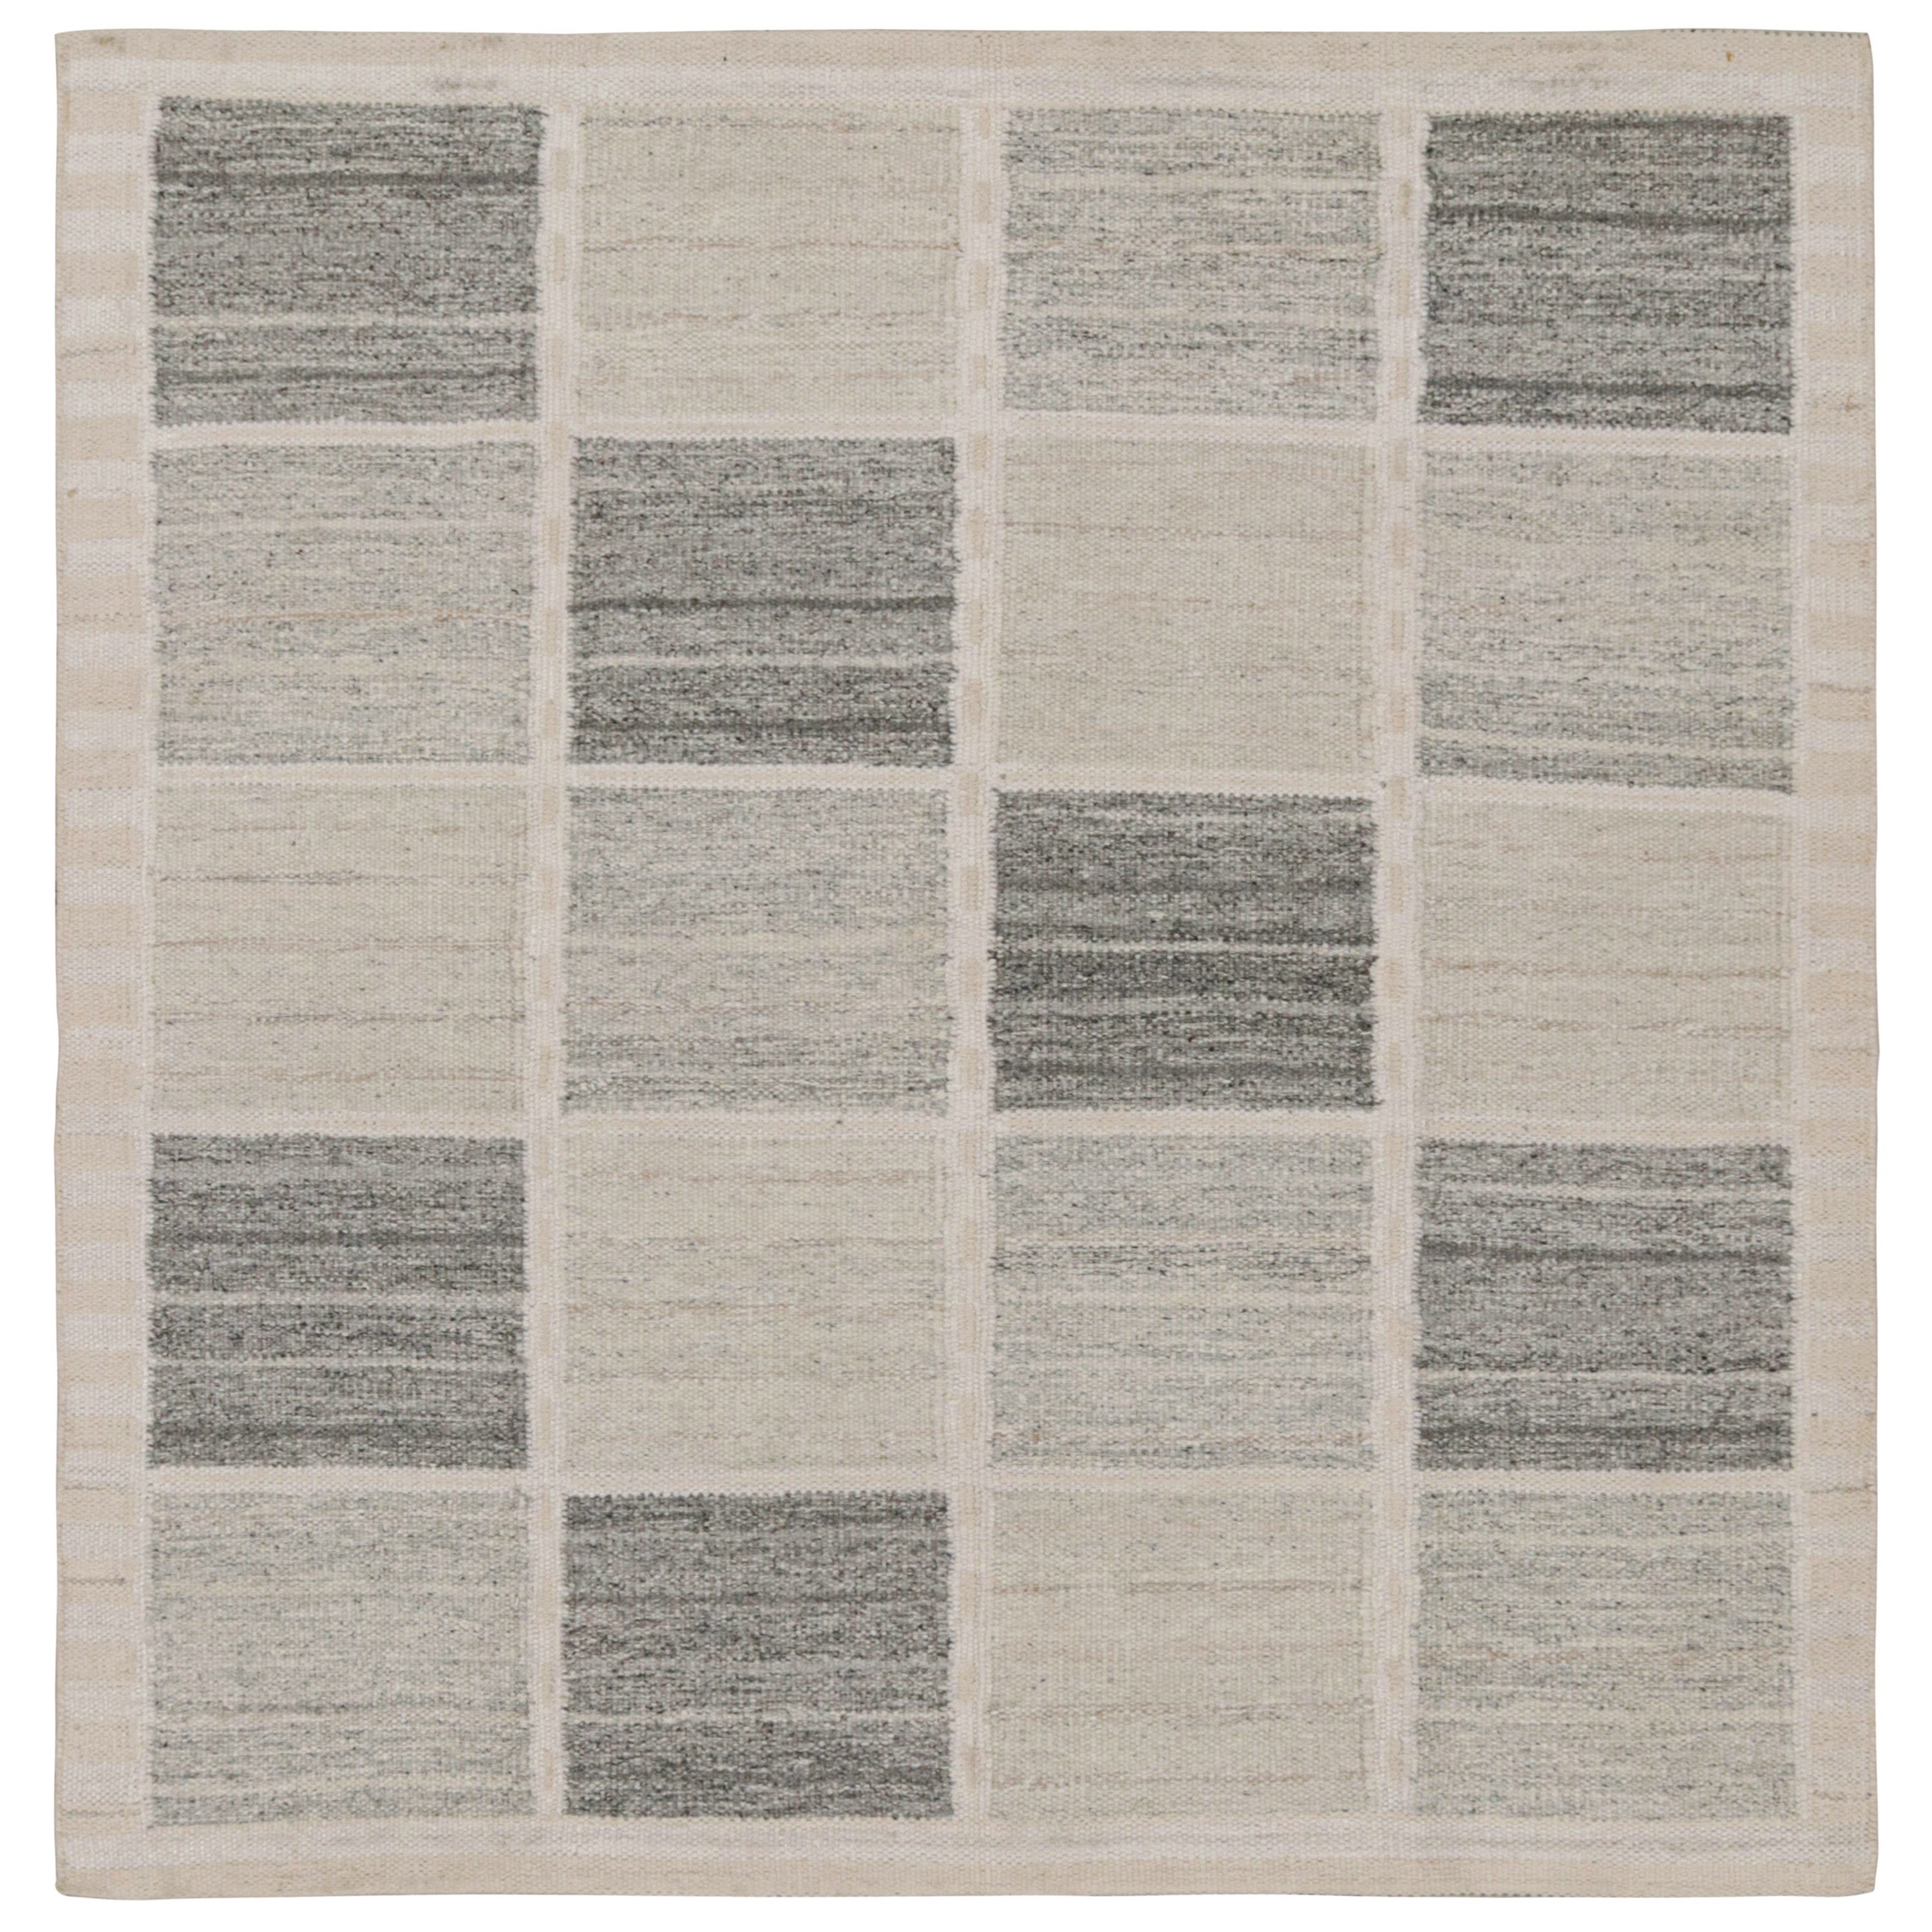 Rug & Kilim’s Scandinavian Style Kilim and Square rug in Gray Geometric Patterns